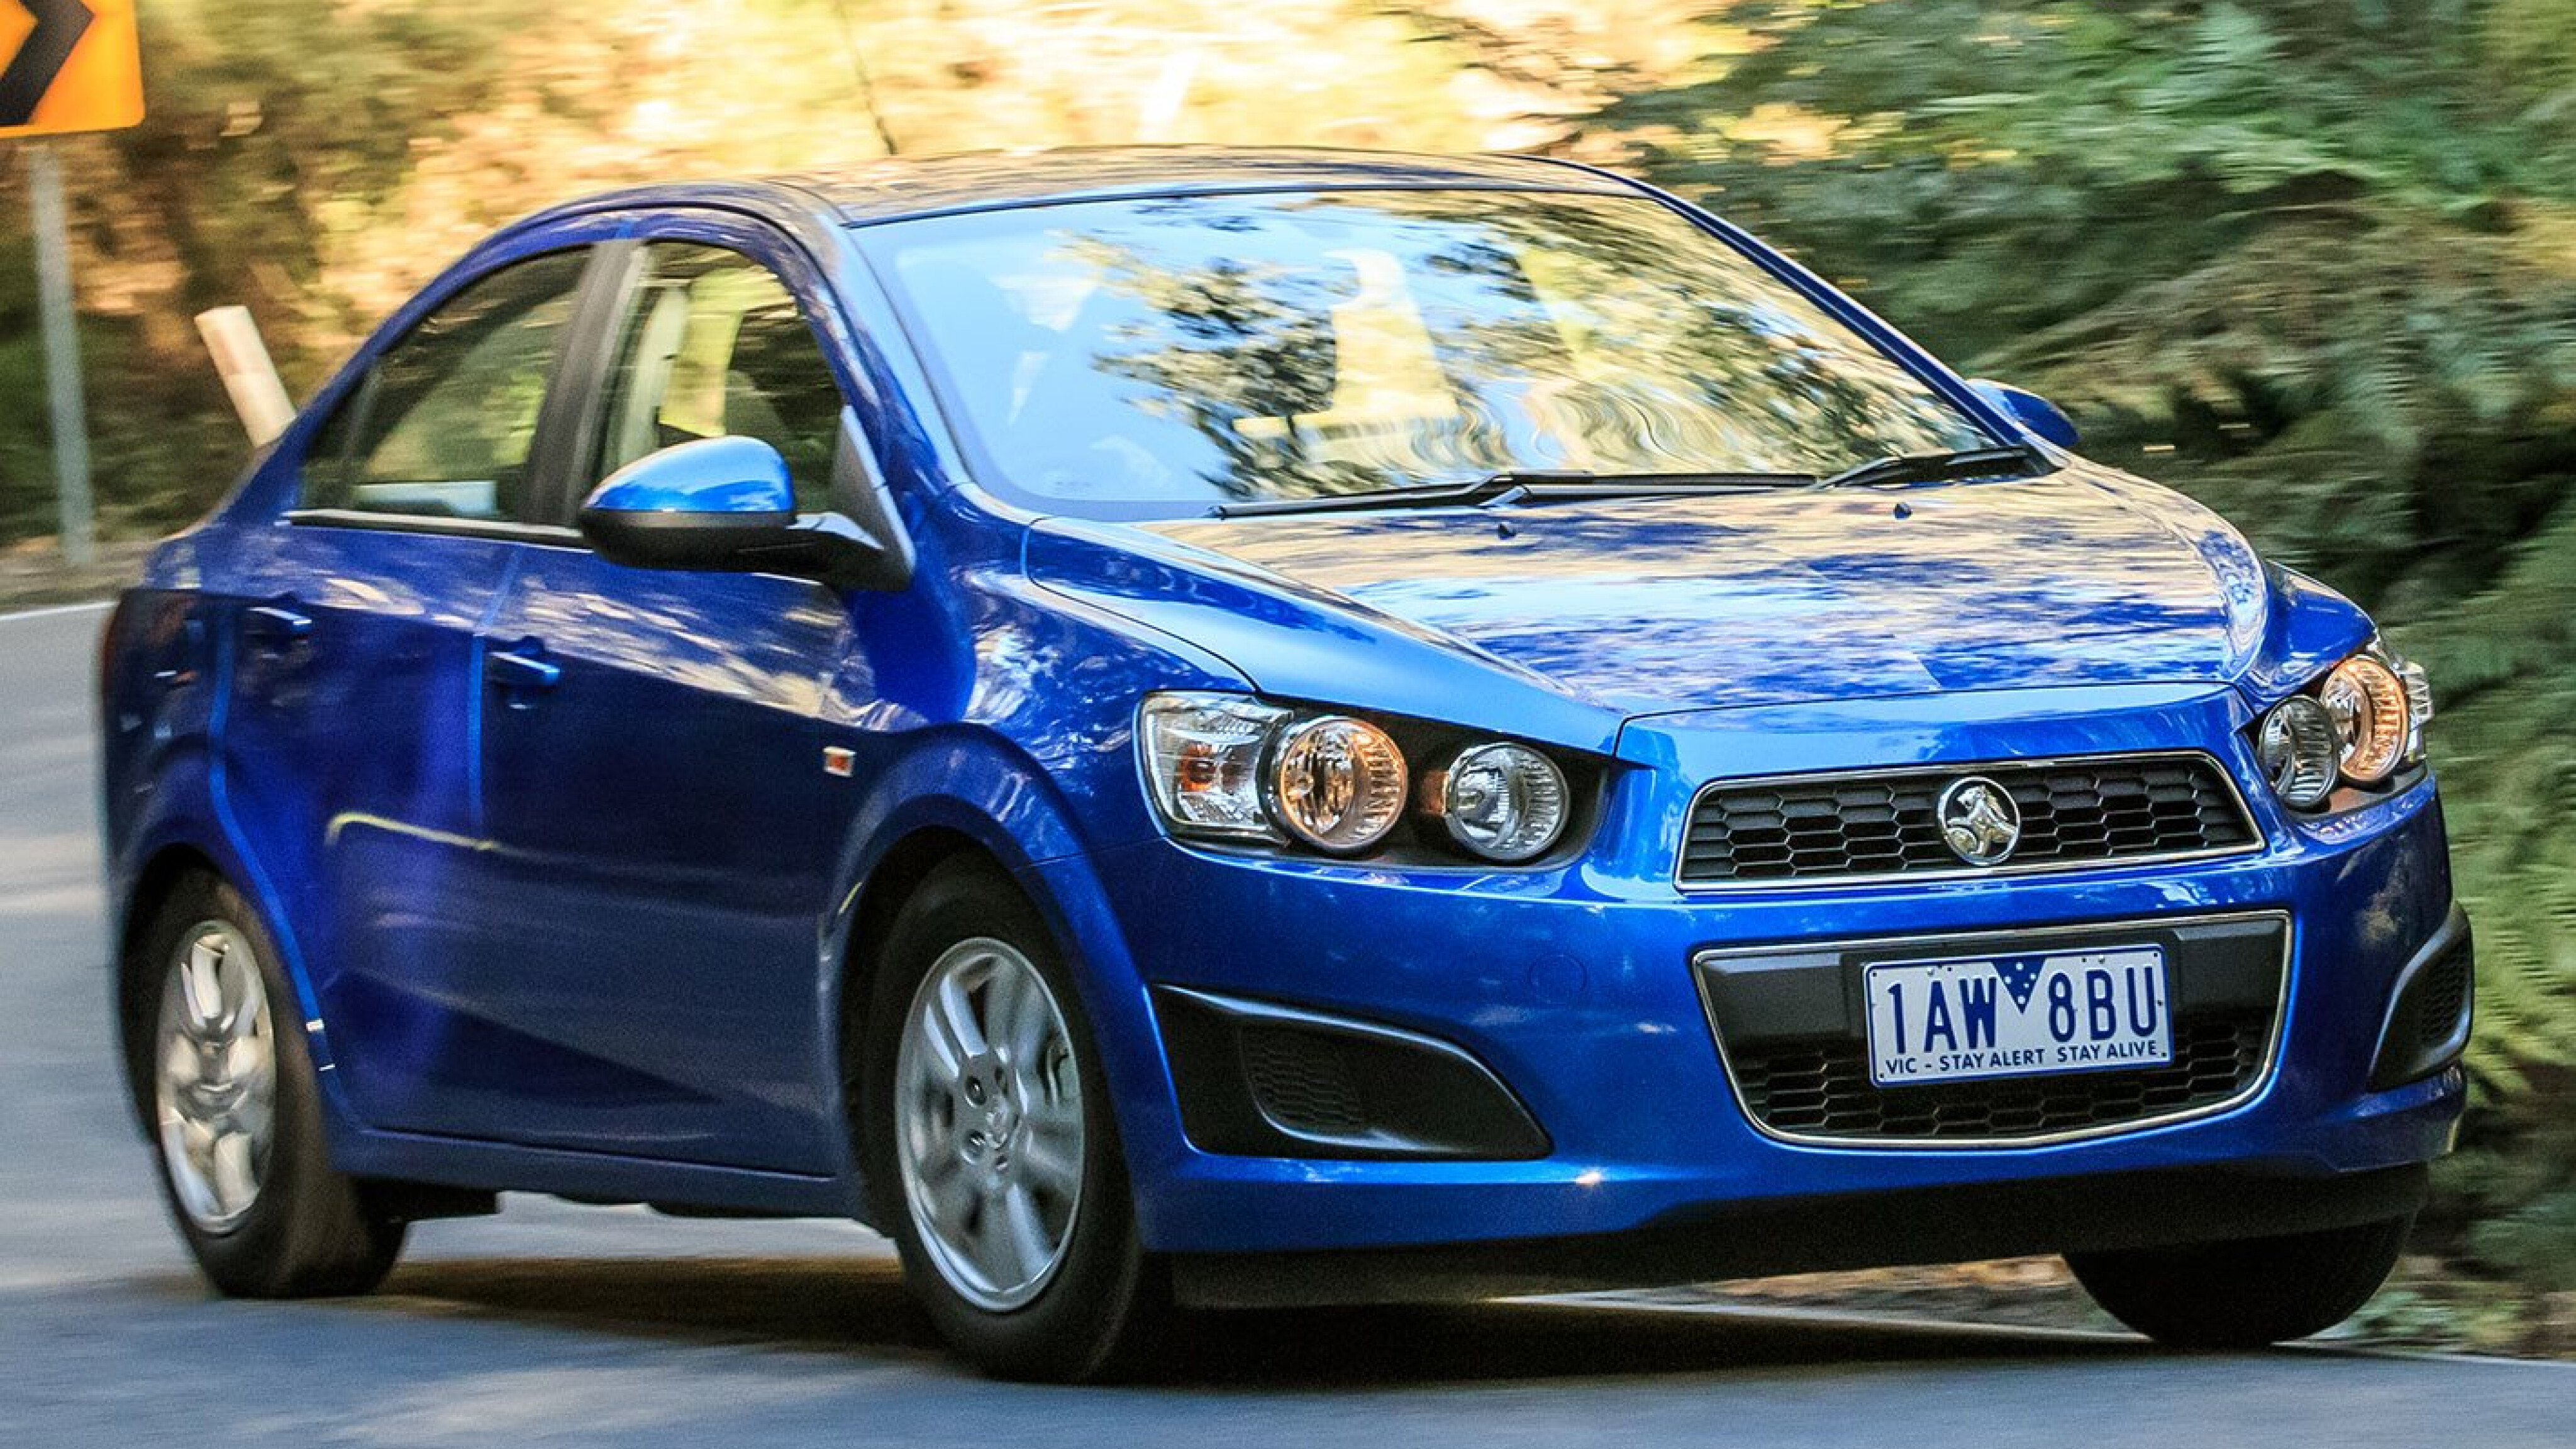 This Custom Car Is A Holden Barina Like You've Never Seen Before